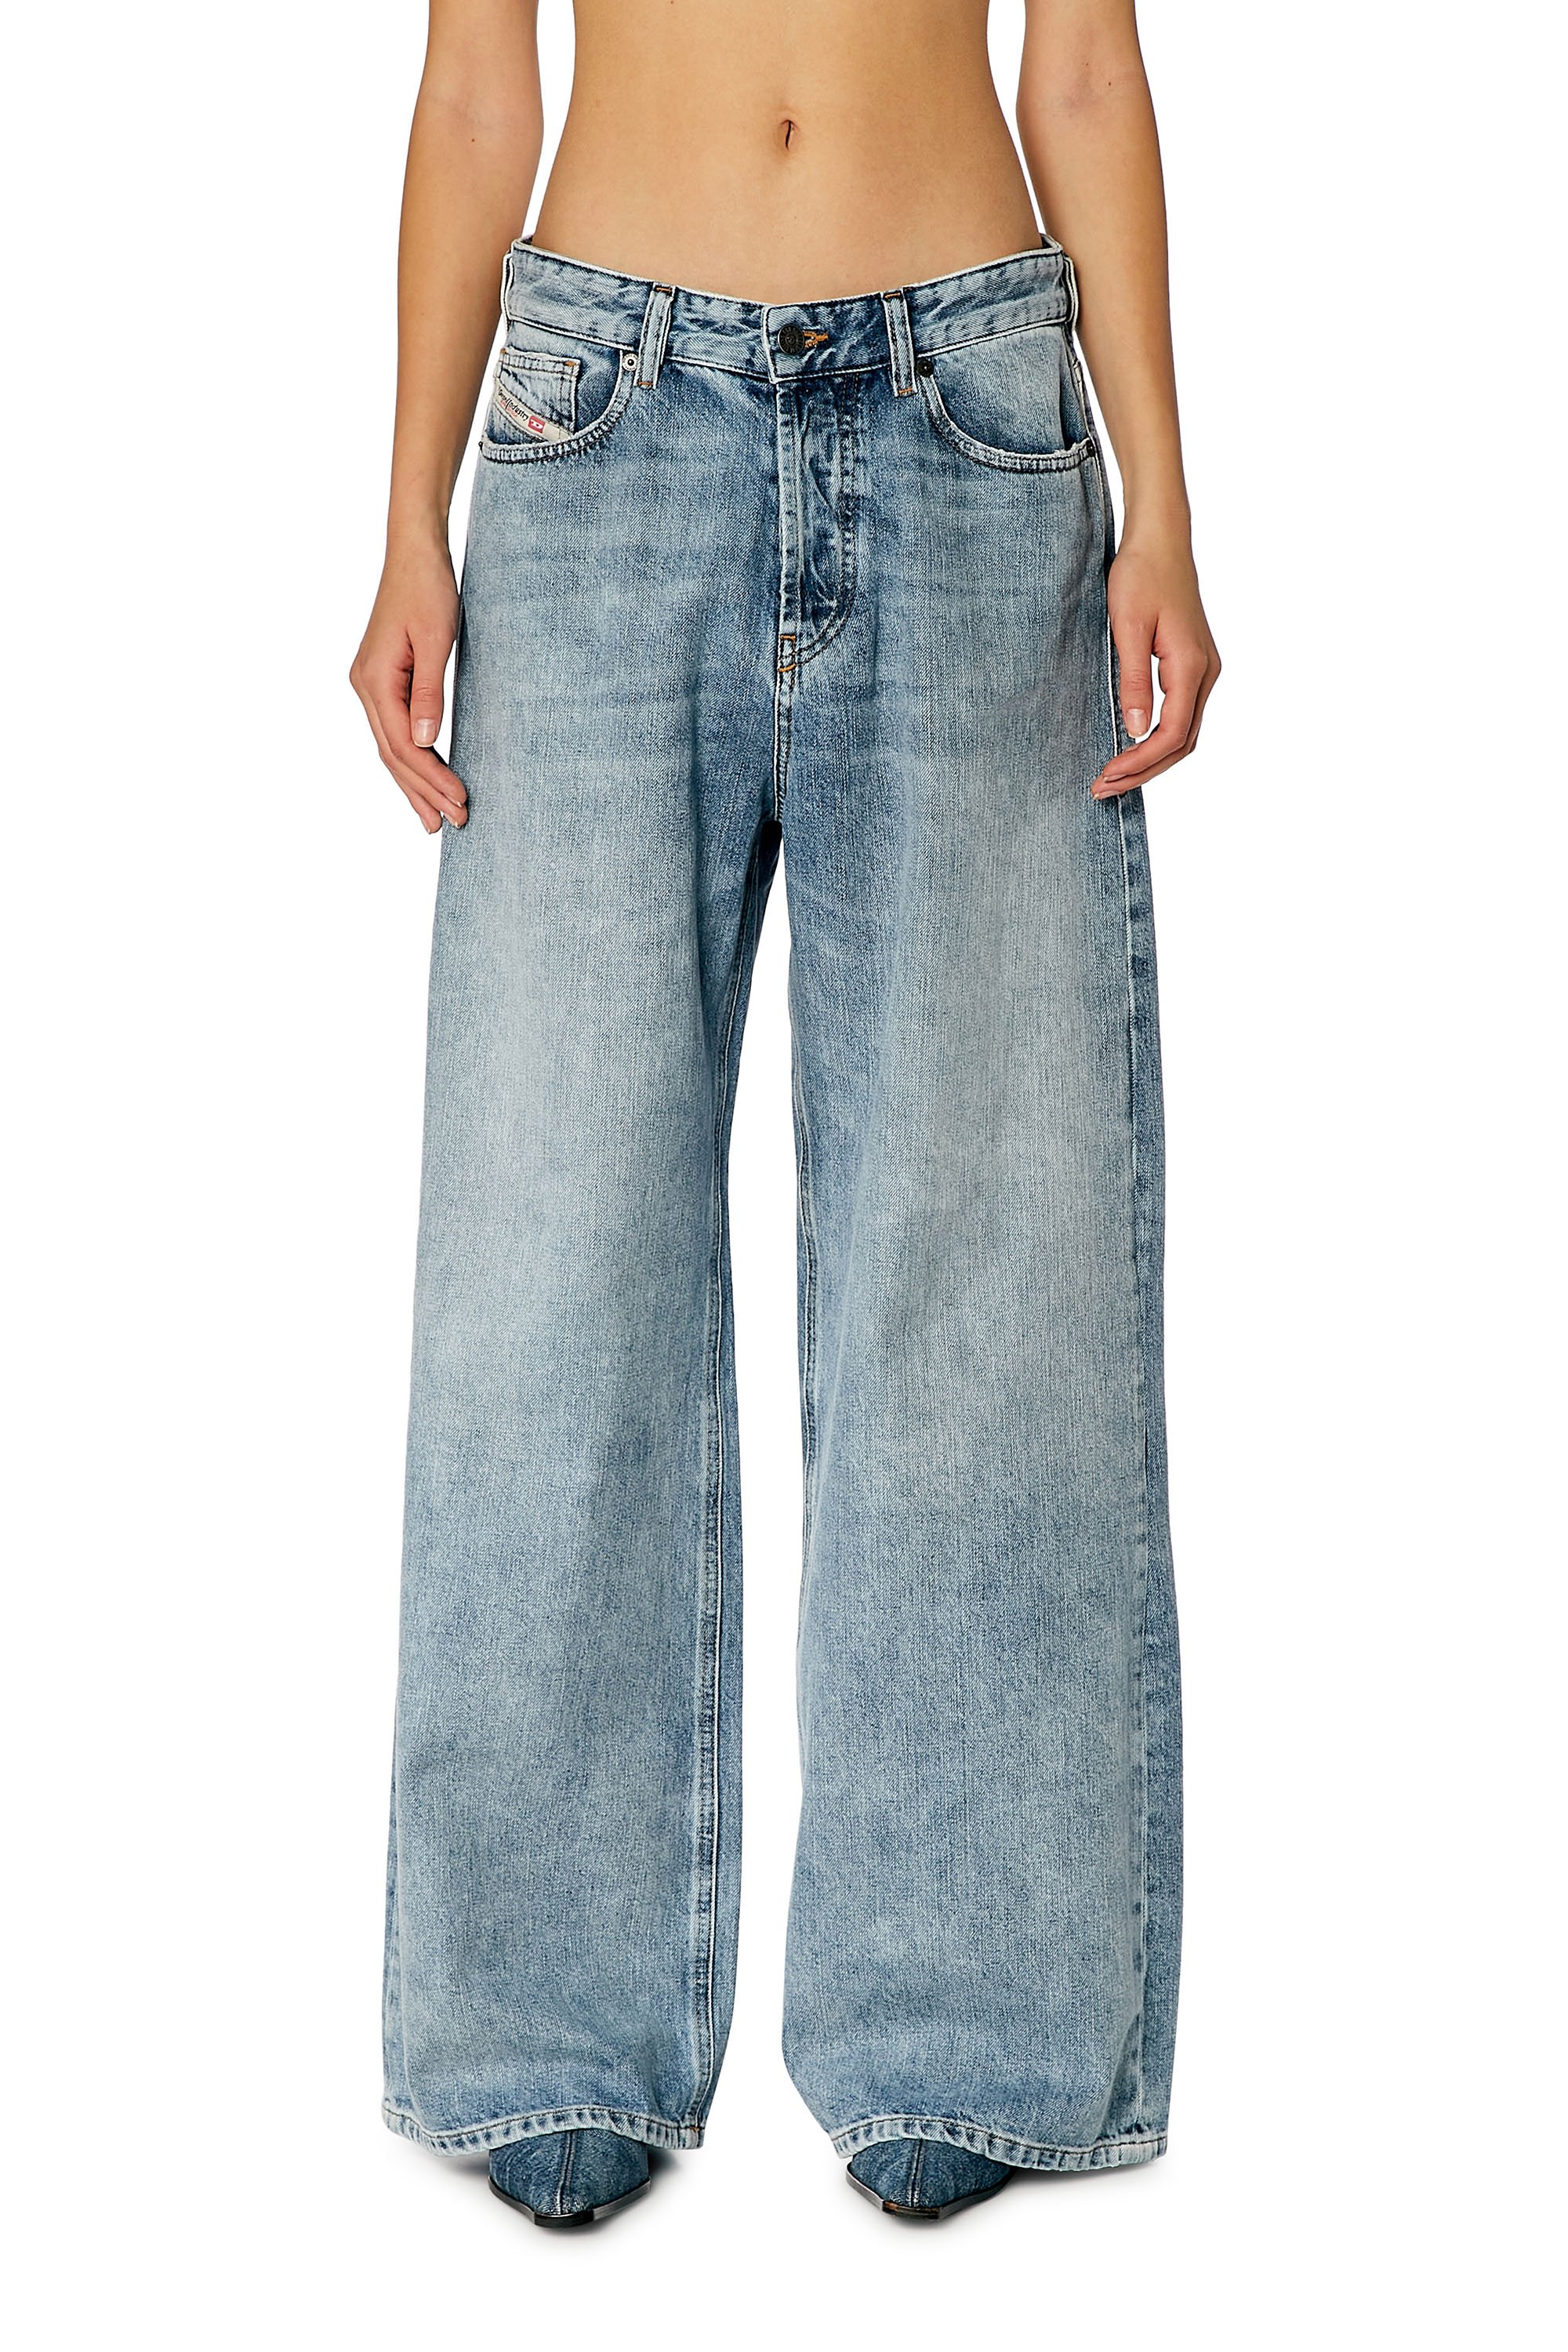 Diesel - Straight Jeans 1996 D-Sire 09H57, Mujer Straight Jeans - 1996 D-Sire in Azul marino - Image 1